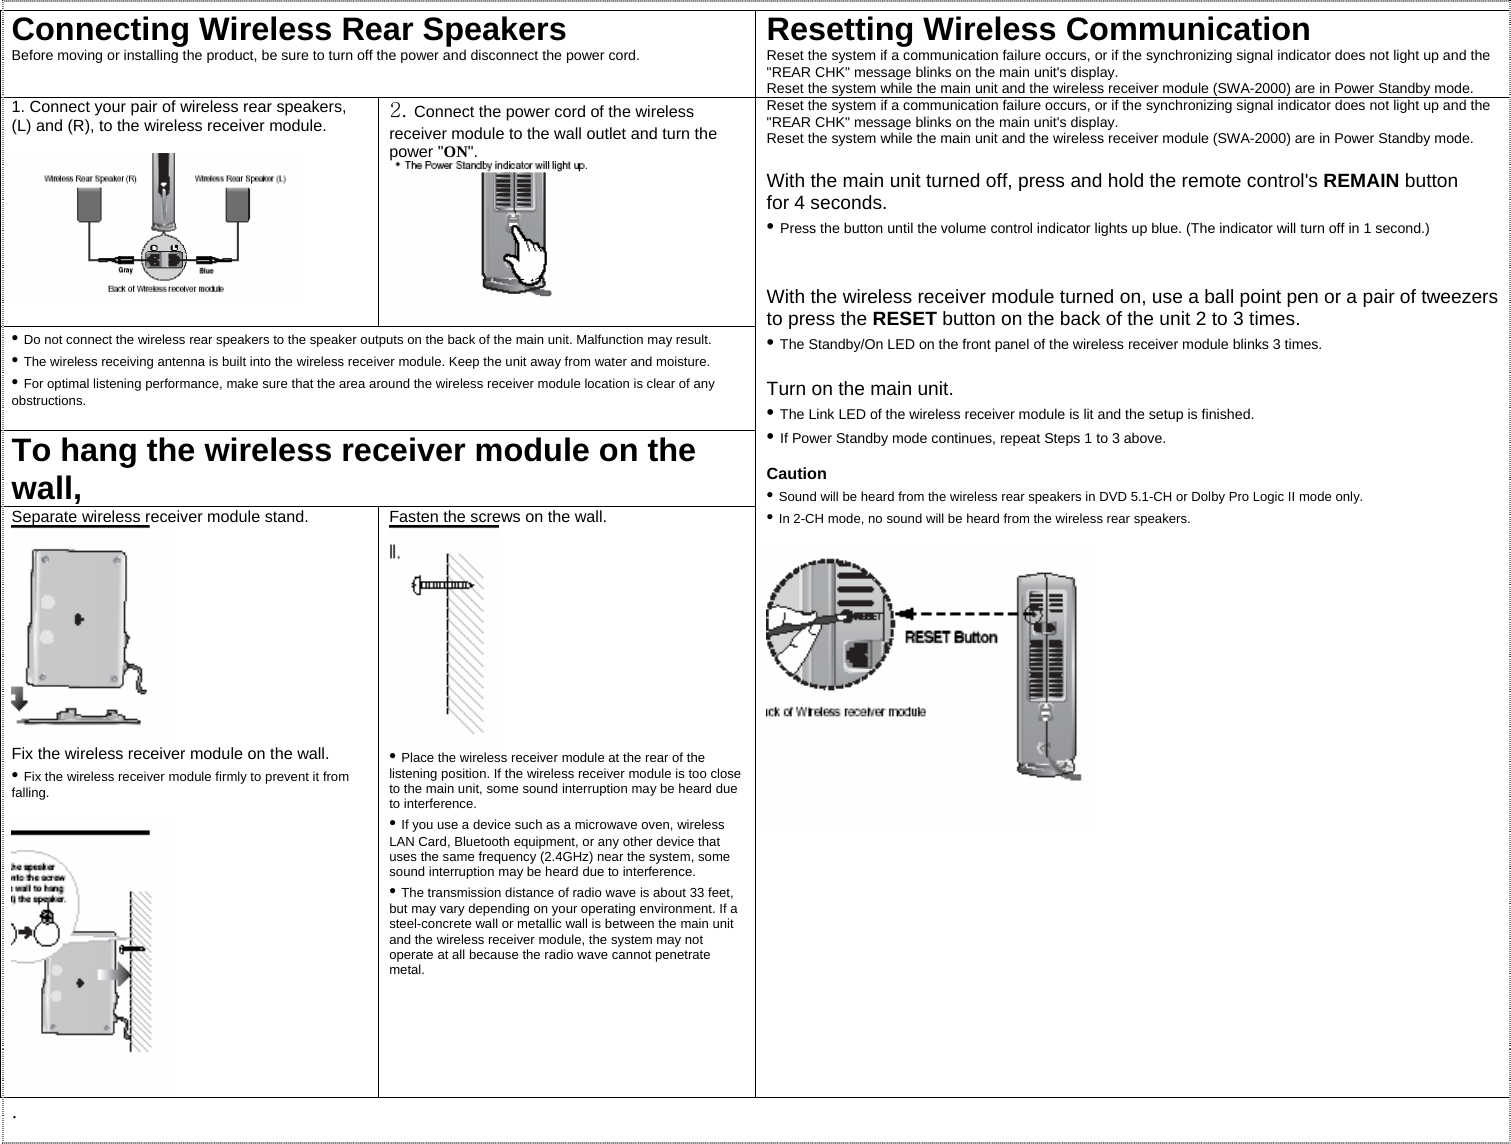 Connecting Wireless Rear Speakers Before moving or installing the product, be sure to turn off the power and disconnect the power cord.  Resetting Wireless Communication Reset the system if a communication failure occurs, or if the synchronizing signal indicator does not light up and the &quot;REAR CHK&quot; message blinks on the main unit&apos;s display. Reset the system while the main unit and the wireless receiver module (SWA-2000) are in Power Standby mode. 1. Connect your pair of wireless rear speakers, (L) and (R), to the wireless receiver module.    2. Connect the power cord of the wireless receiver module to the wall outlet and turn the power &quot;ON&quot;.  • Do not connect the wireless rear speakers to the speaker outputs on the back of the main unit. Malfunction may result. • The wireless receiving antenna is built into the wireless receiver module. Keep the unit away from water and moisture. • For optimal listening performance, make sure that the area around the wireless receiver module location is clear of any obstructions.  To hang the wireless receiver module on the wall, Separate wireless receiver module stand.  Fix the wireless receiver module on the wall. • Fix the wireless receiver module firmly to prevent it from falling.   Fasten the screws on the wall.  • Place the wireless receiver module at the rear of the listening position. If the wireless receiver module is too close to the main unit, some sound interruption may be heard due to interference. • If you use a device such as a microwave oven, wireless LAN Card, Bluetooth equipment, or any other device that uses the same frequency (2.4GHz) near the system, some sound interruption may be heard due to interference. • The transmission distance of radio wave is about 33 feet, but may vary depending on your operating environment. If a steel-concrete wall or metallic wall is between the main unit and the wireless receiver module, the system may not operate at all because the radio wave cannot penetrate metal.  Reset the system if a communication failure occurs, or if the synchronizing signal indicator does not light up and the &quot;REAR CHK&quot; message blinks on the main unit&apos;s display. Reset the system while the main unit and the wireless receiver module (SWA-2000) are in Power Standby mode.  With the main unit turned off, press and hold the remote control&apos;s REMAIN button for 4 seconds. • Press the button until the volume control indicator lights up blue. (The indicator will turn off in 1 second.)   With the wireless receiver module turned on, use a ball point pen or a pair of tweezers to press the RESET button on the back of the unit 2 to 3 times. • The Standby/On LED on the front panel of the wireless receiver module blinks 3 times.  Turn on the main unit. • The Link LED of the wireless receiver module is lit and the setup is finished. • If Power Standby mode continues, repeat Steps 1 to 3 above.  Caution • Sound will be heard from the wireless rear speakers in DVD 5.1-CH or Dolby Pro Logic II mode only. • In 2-CH mode, no sound will be heard from the wireless rear speakers.         . 